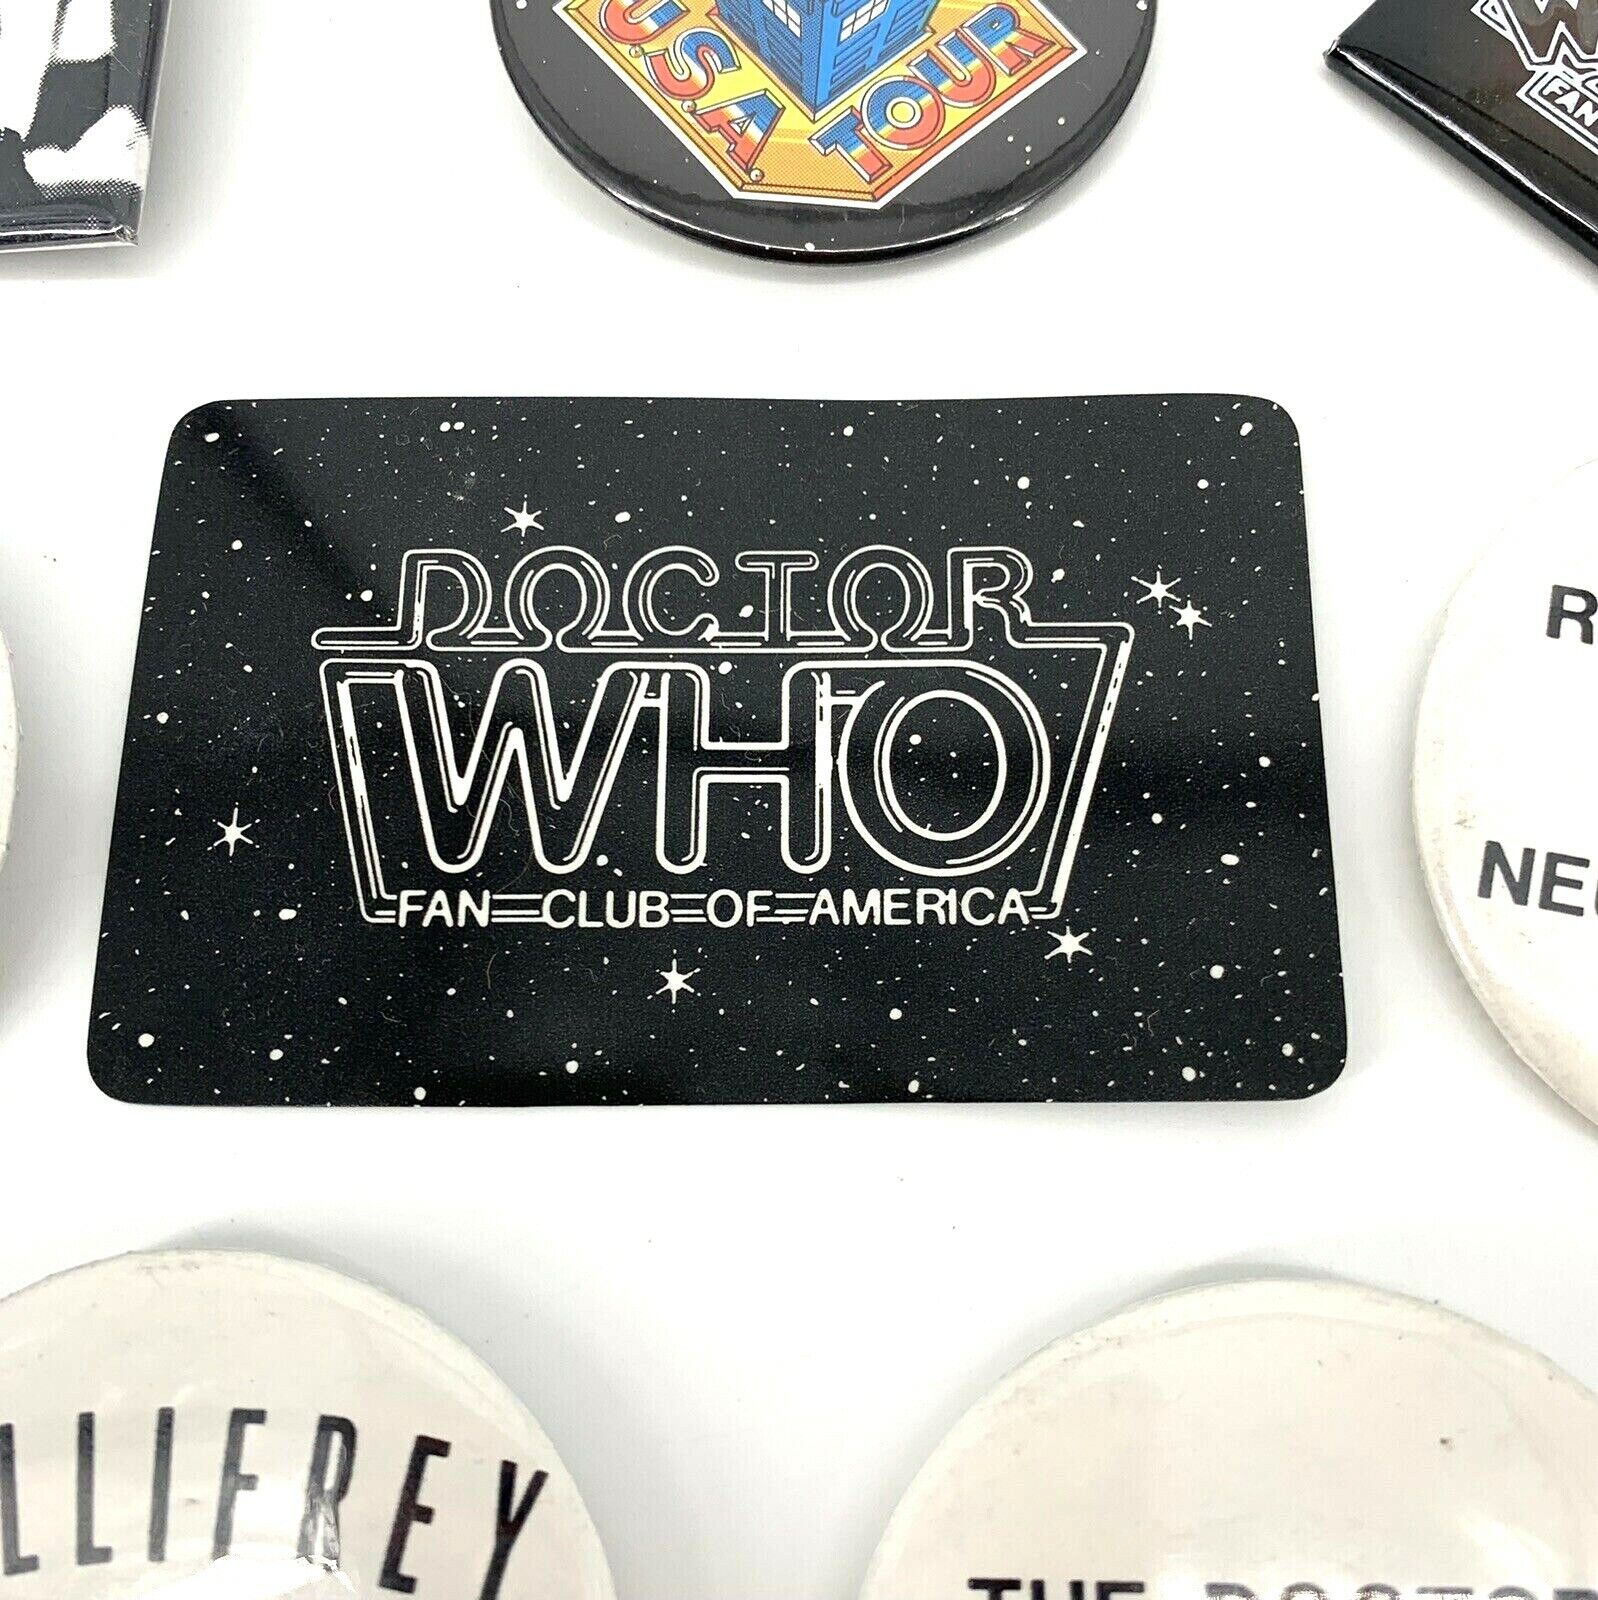 Vintage Dr Who Tom Baker Pin 8 Piece Collectible Lot Fan Club Gift Set  Без бренда - фотография #8